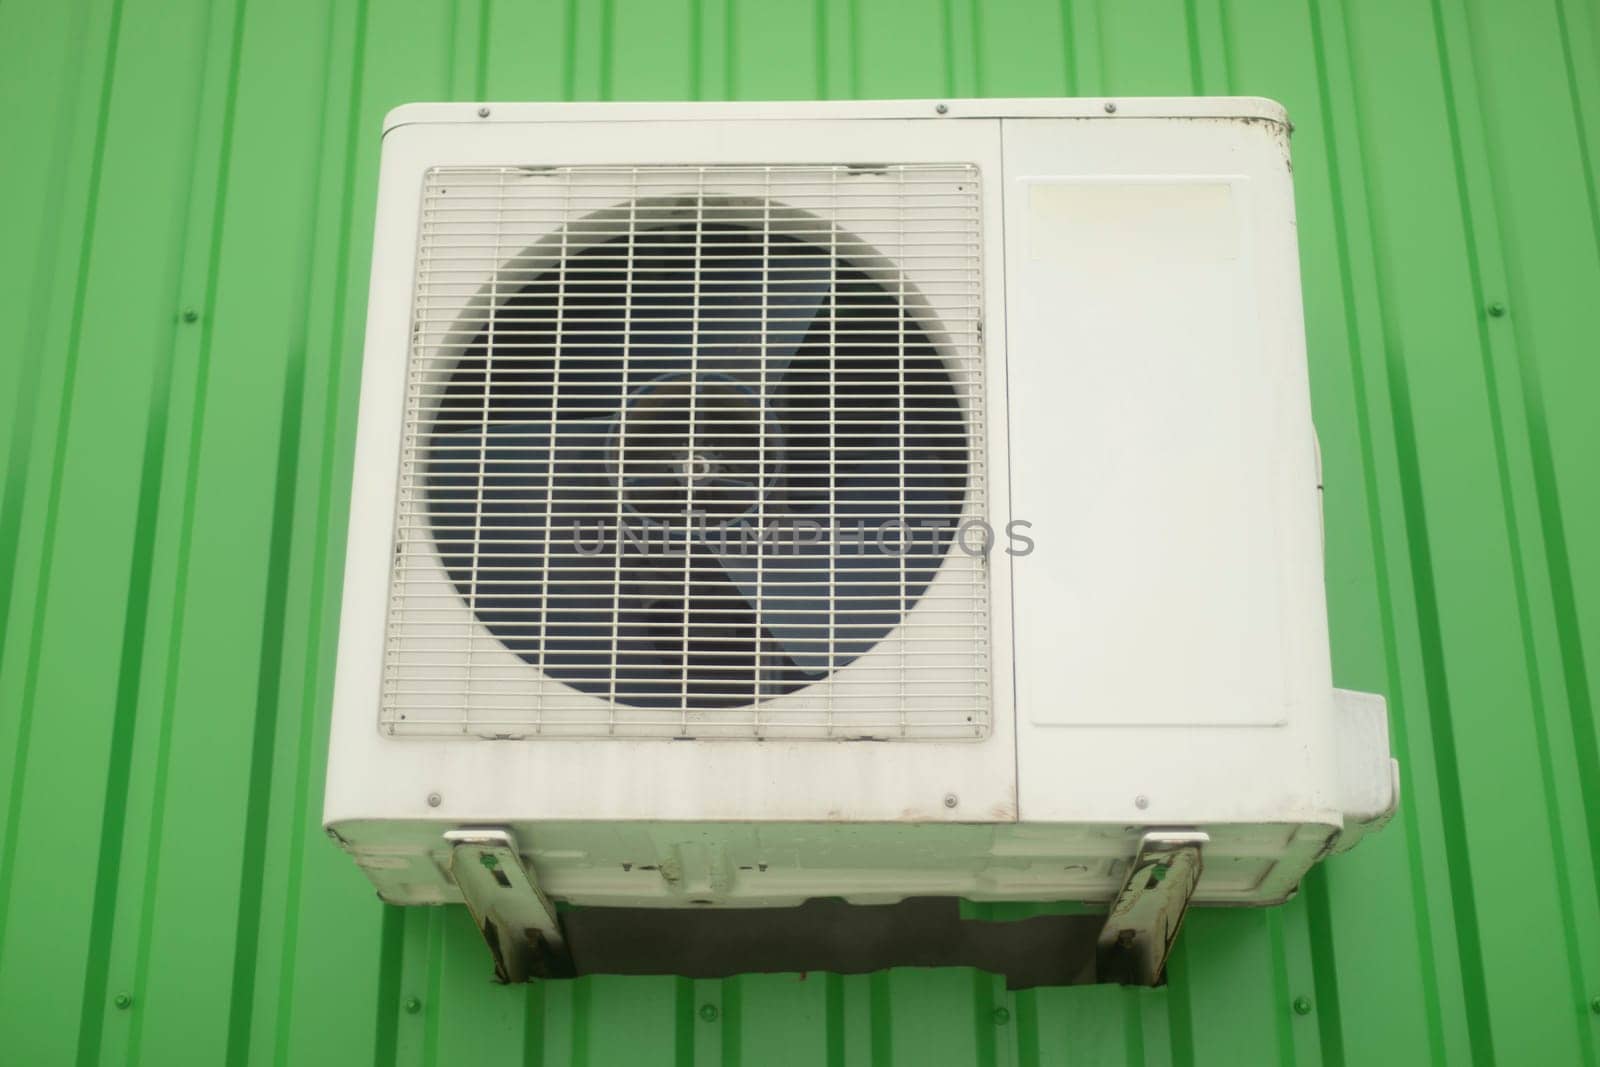 Air conditioning on wall. White air conditioning on building. Cooling system. Fan with grille.